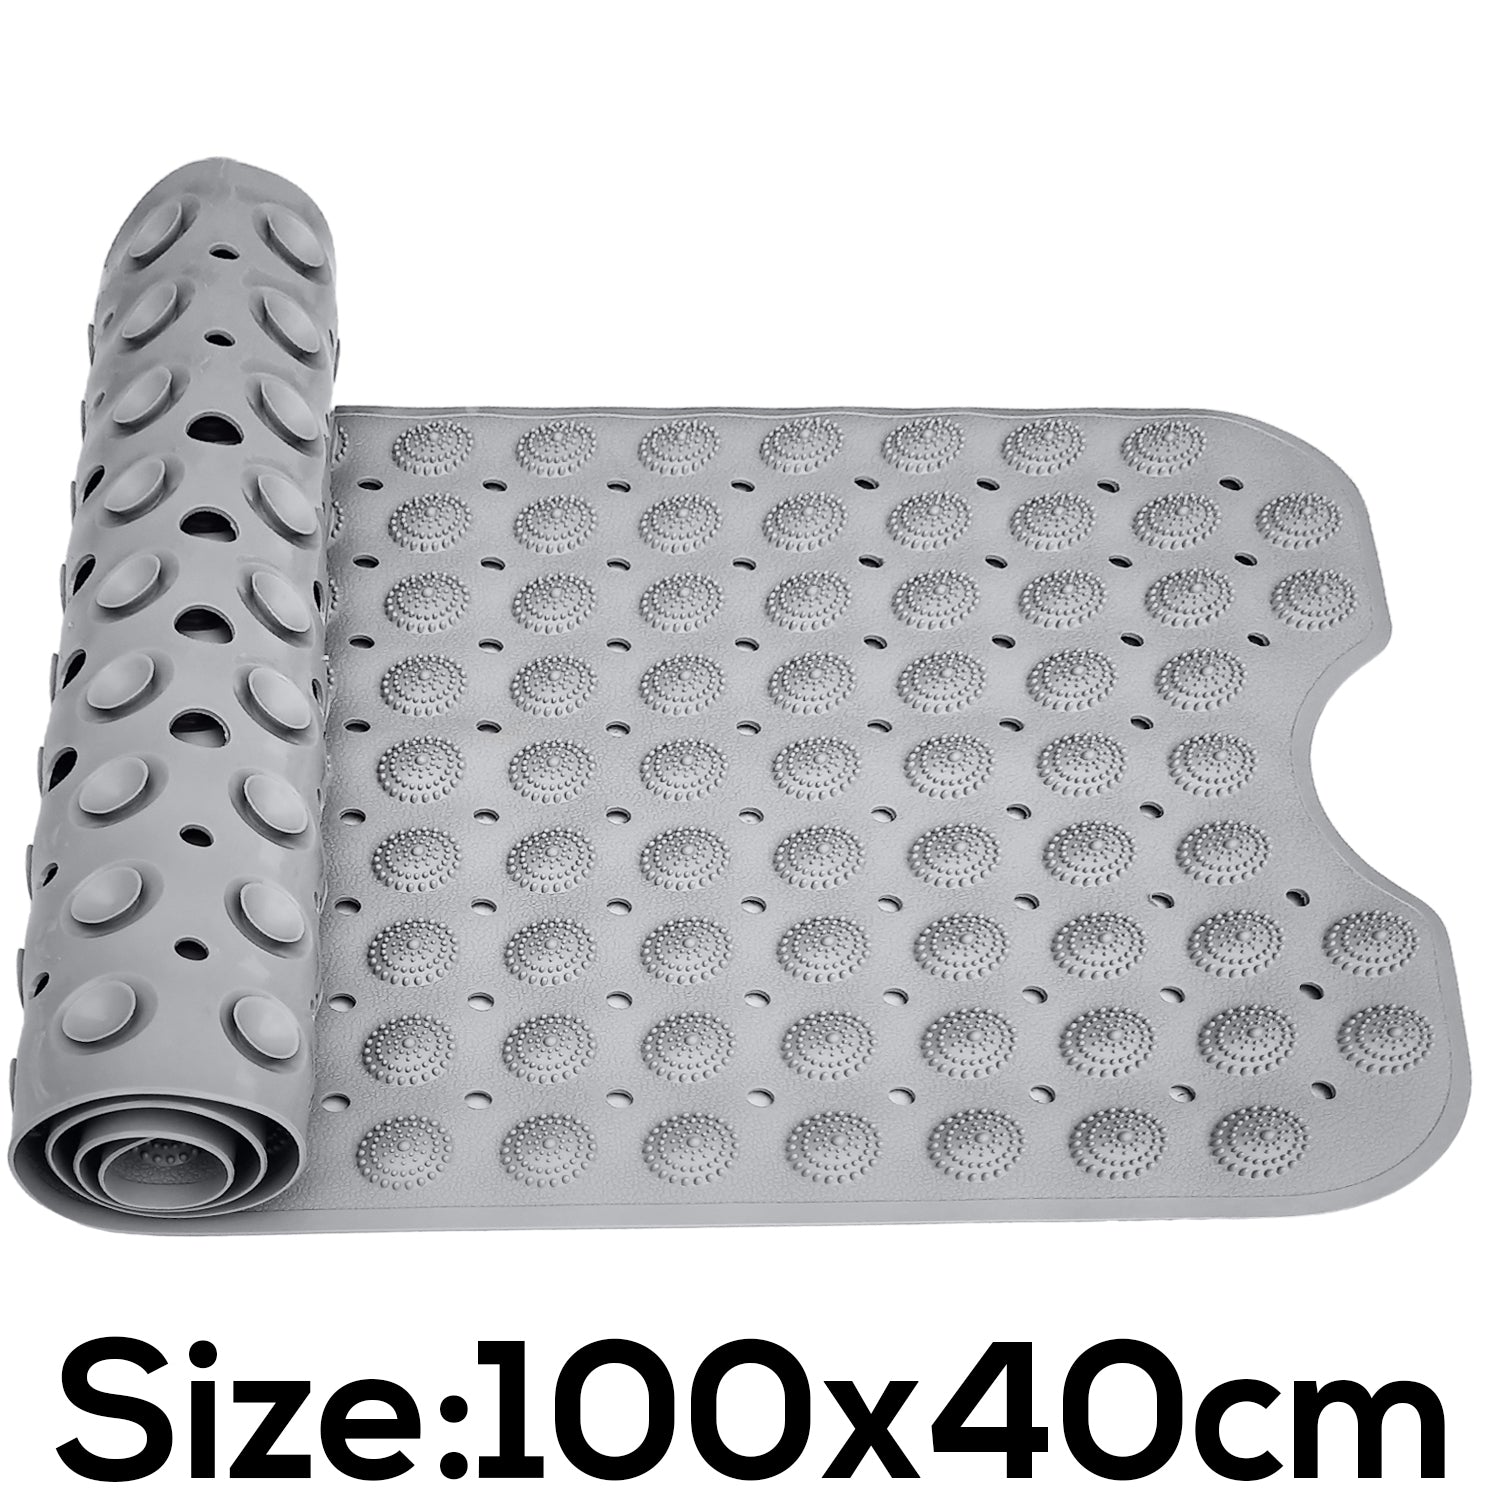 Experia Anti Slip Bath Mat with Suction Cup - 100 x 40 cm (Grey Color With Accu Pebble) LifeKrafts